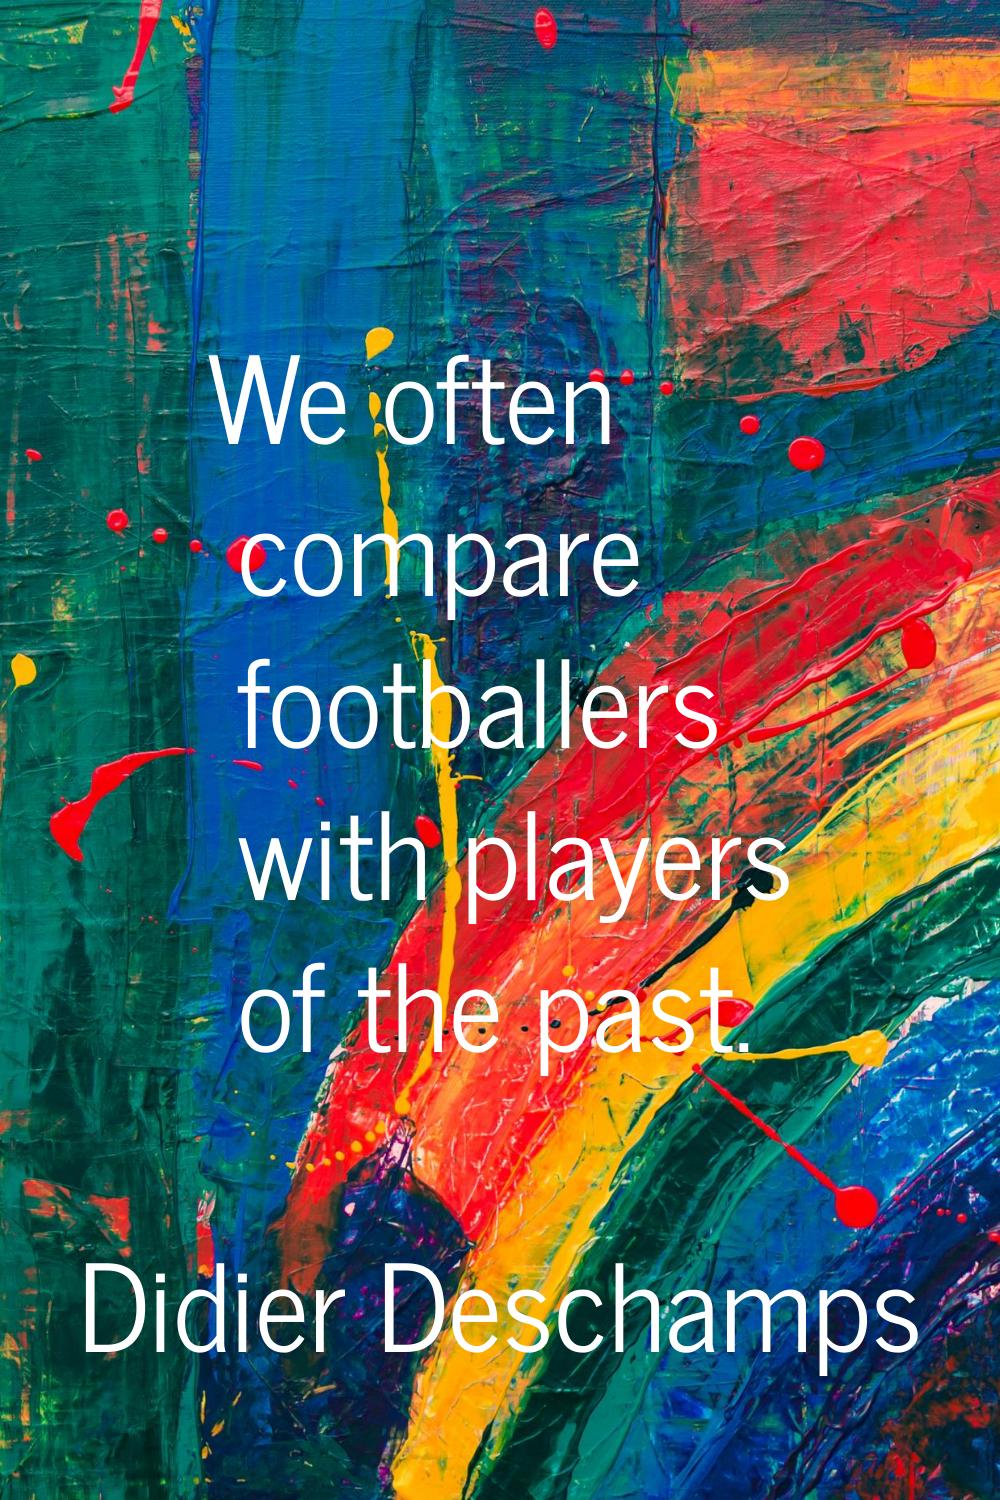 We often compare footballers with players of the past.